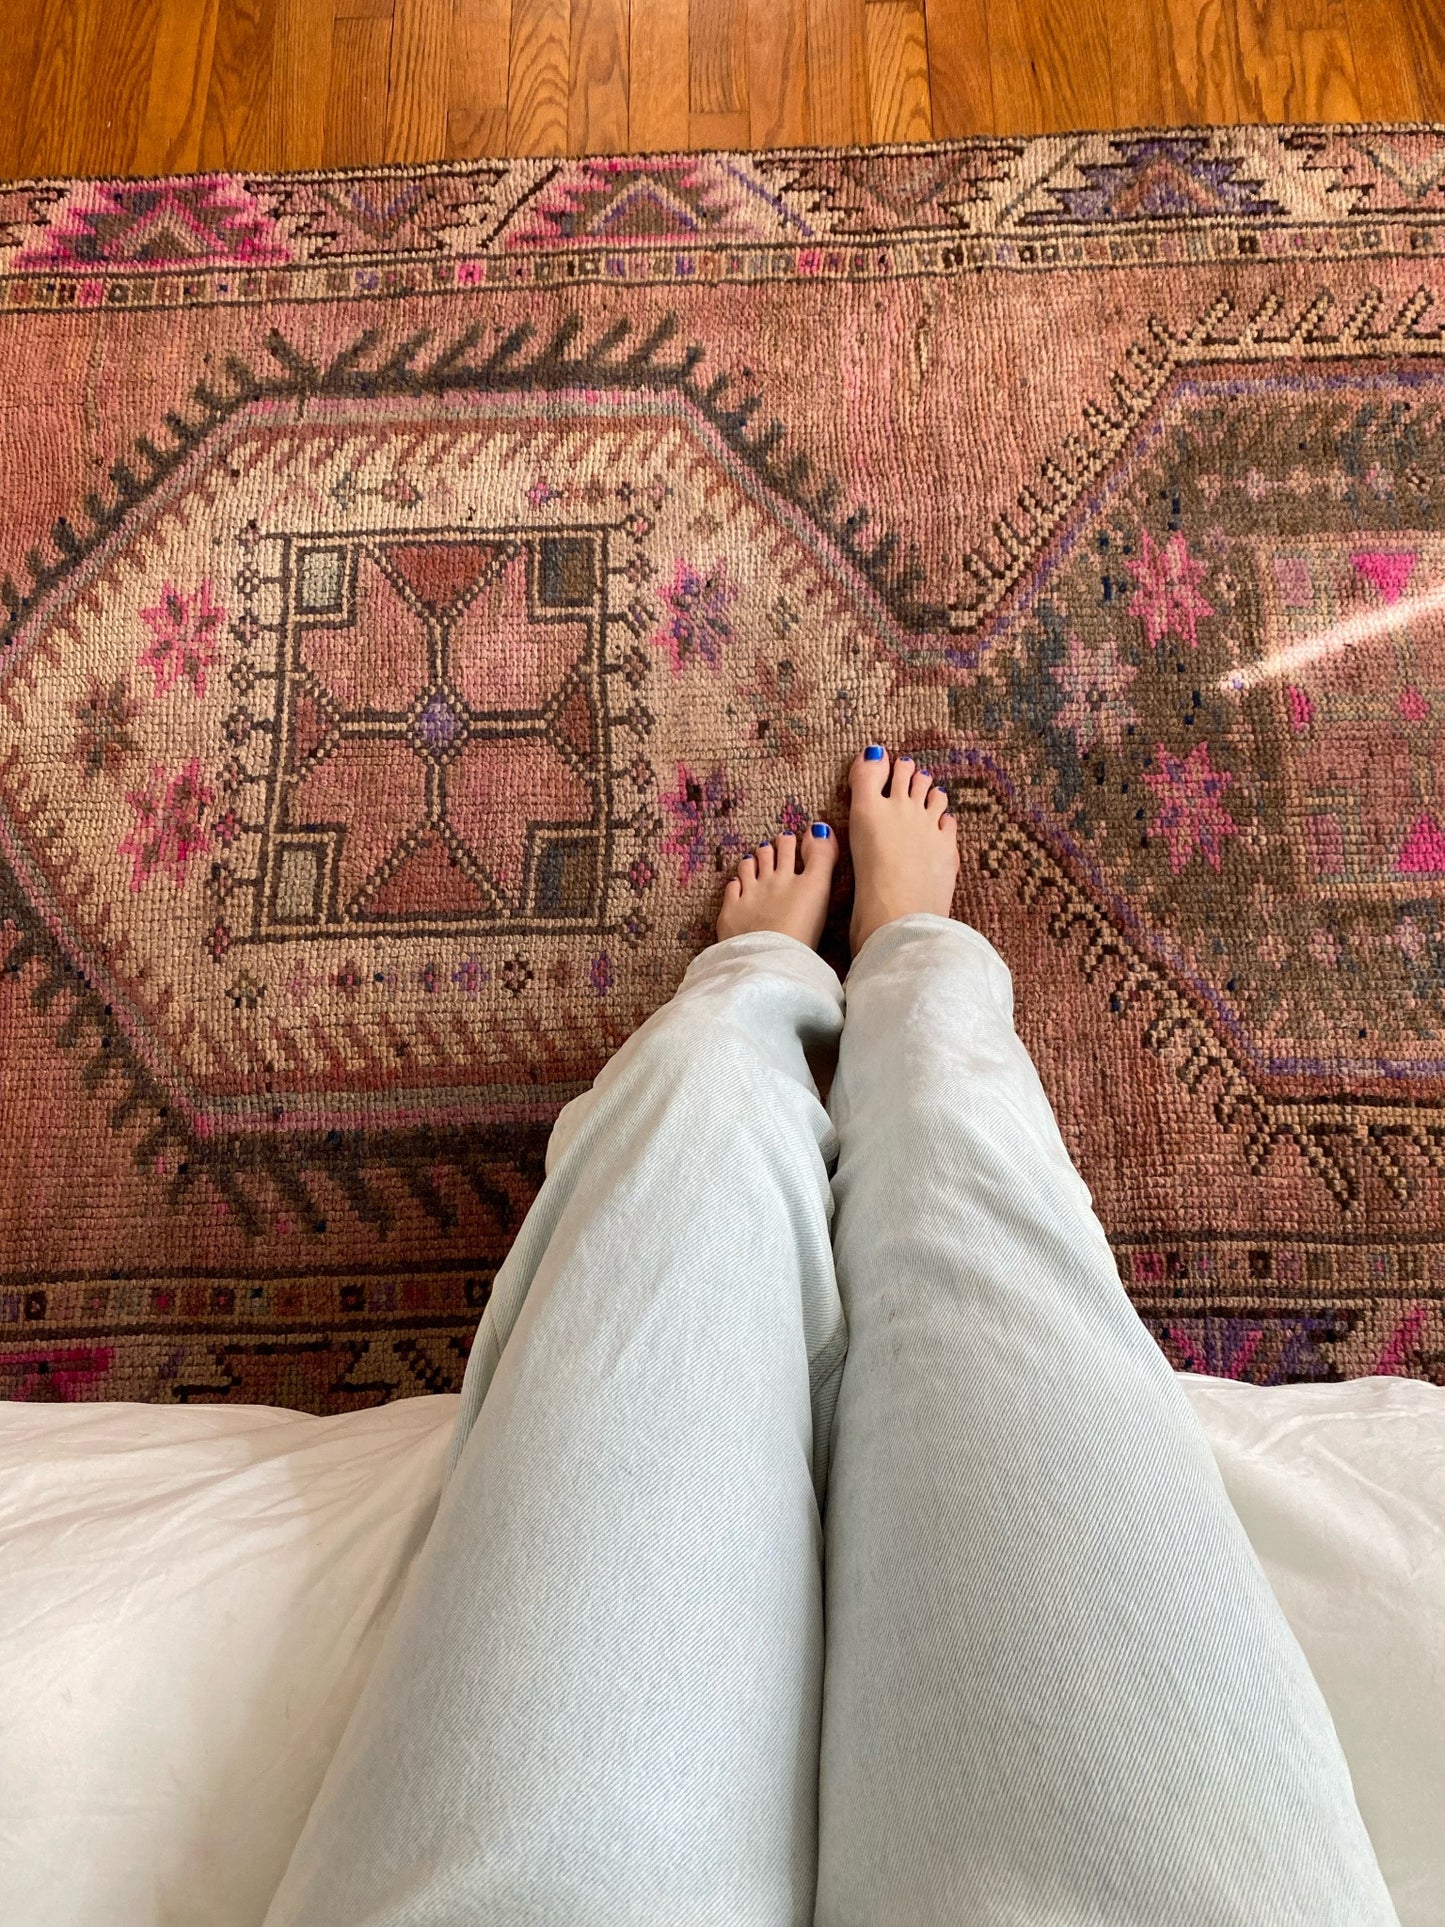 See Details and Motifs on Tonea Persian Pink Rug